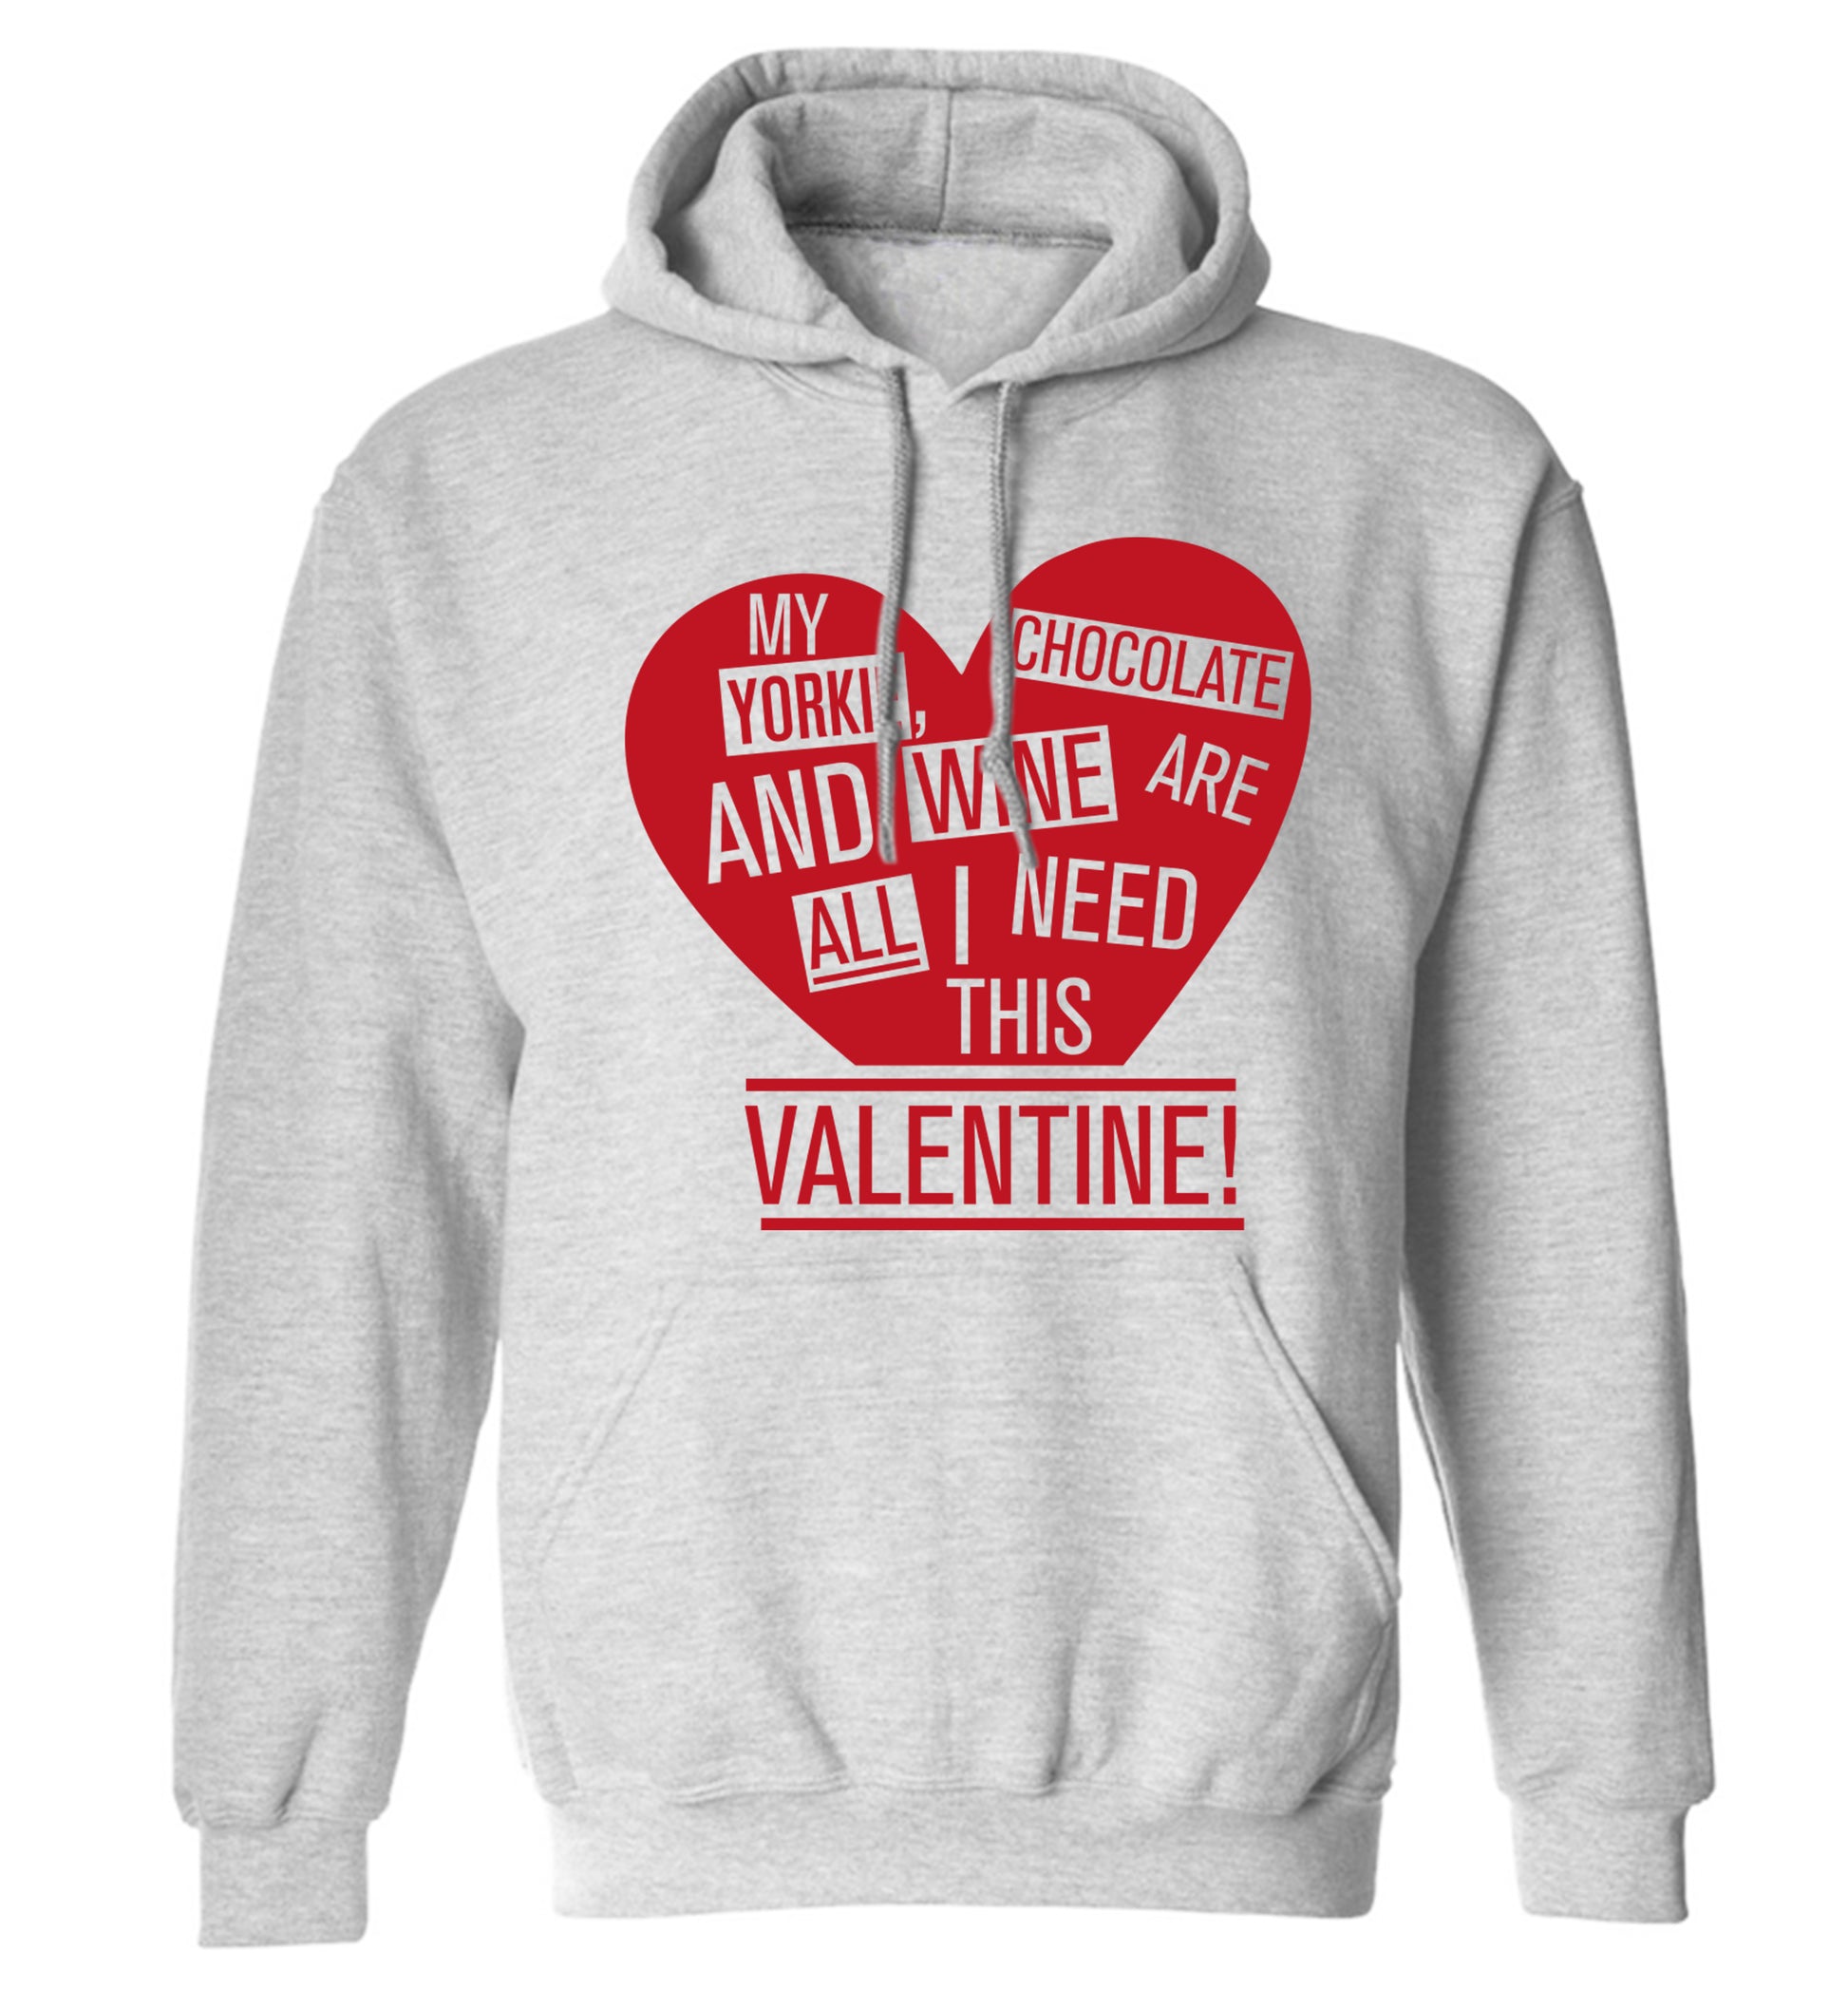 My yorkie, chocolate and wine are all I need this valentine! adults unisex grey hoodie 2XL